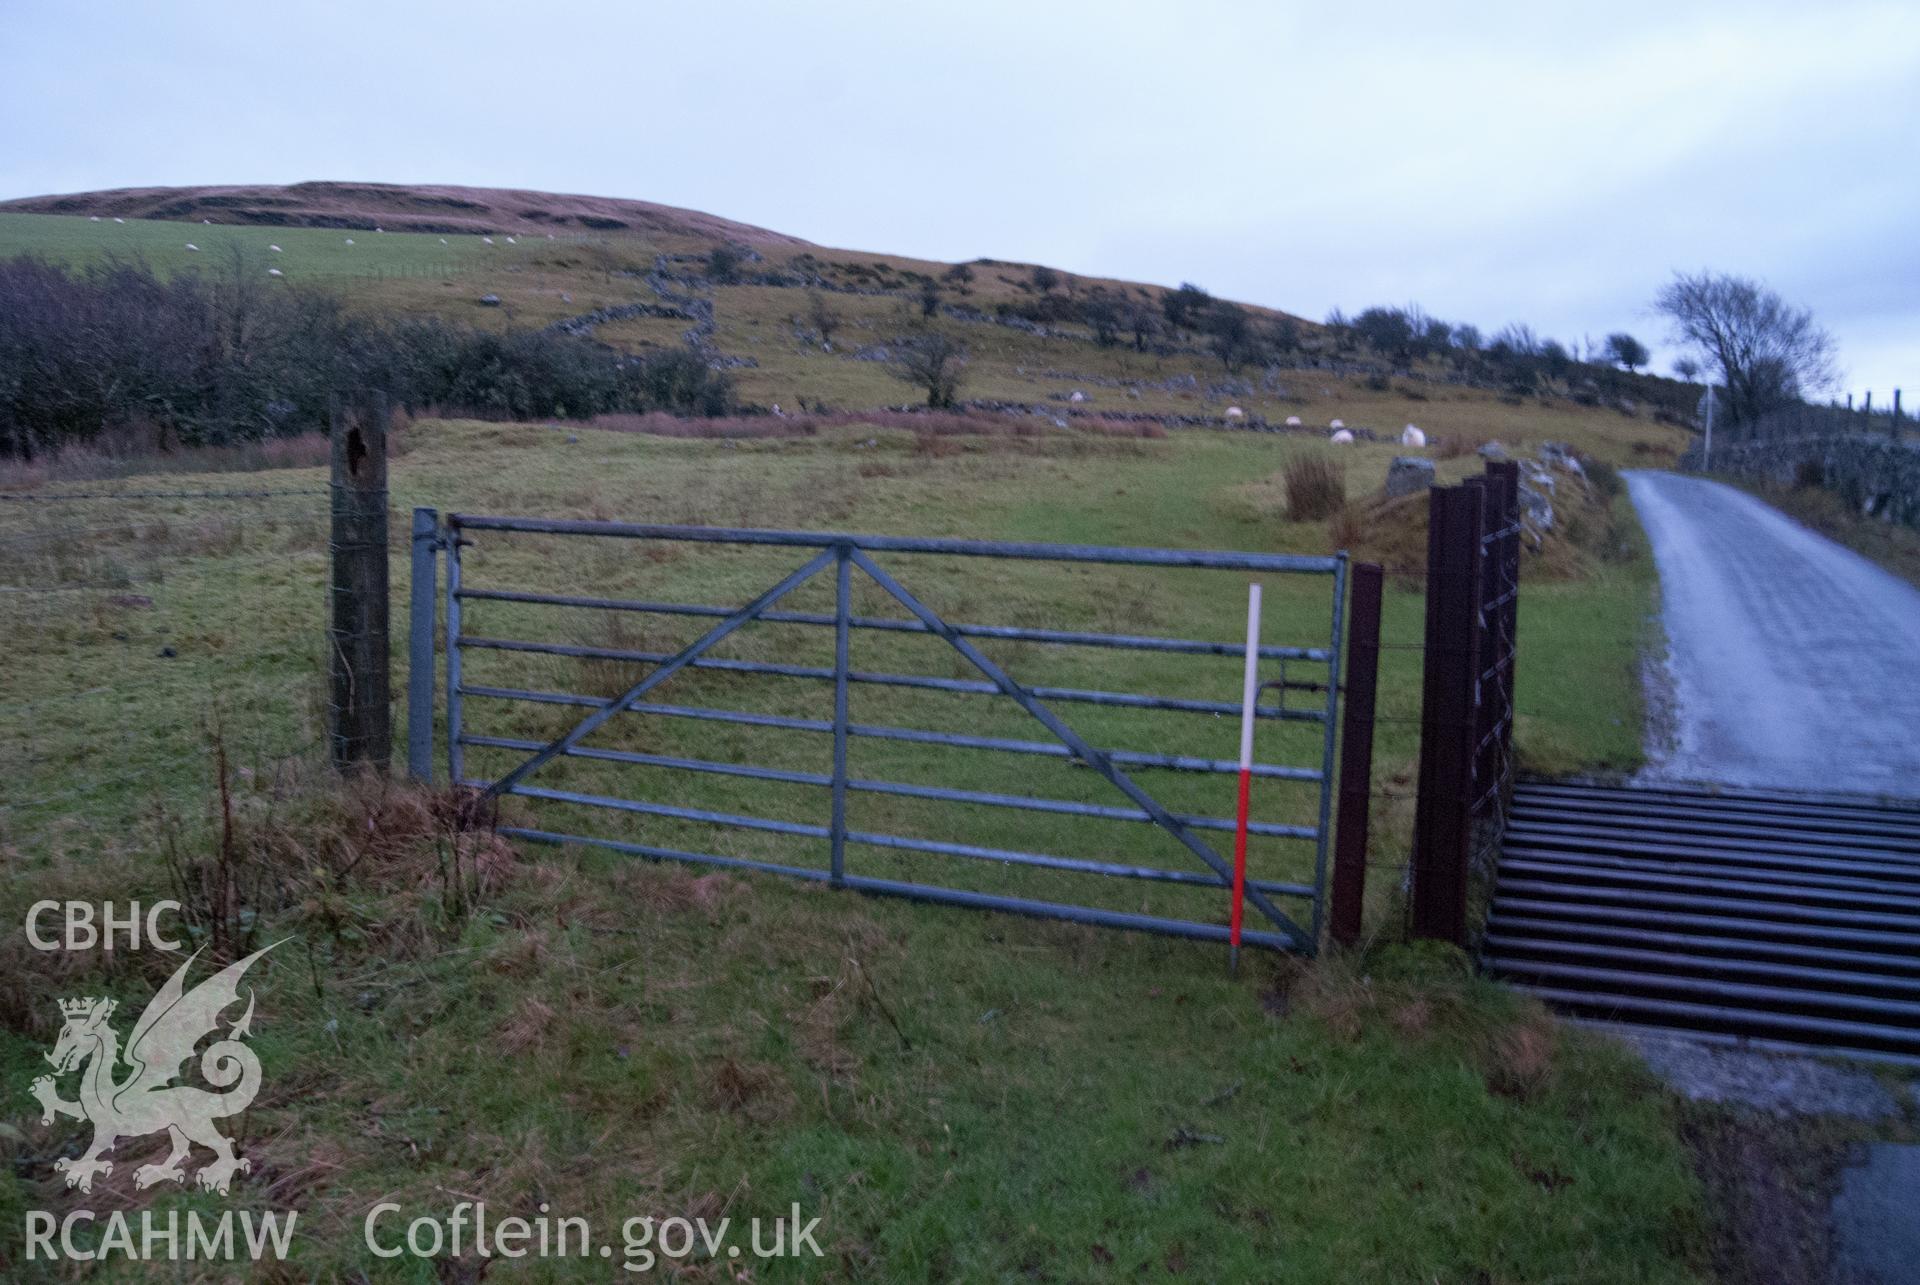 View from north-west, showing view of point where pipeline crosses onto other side of road, just before cattle grid near Erw Gain farmhouse